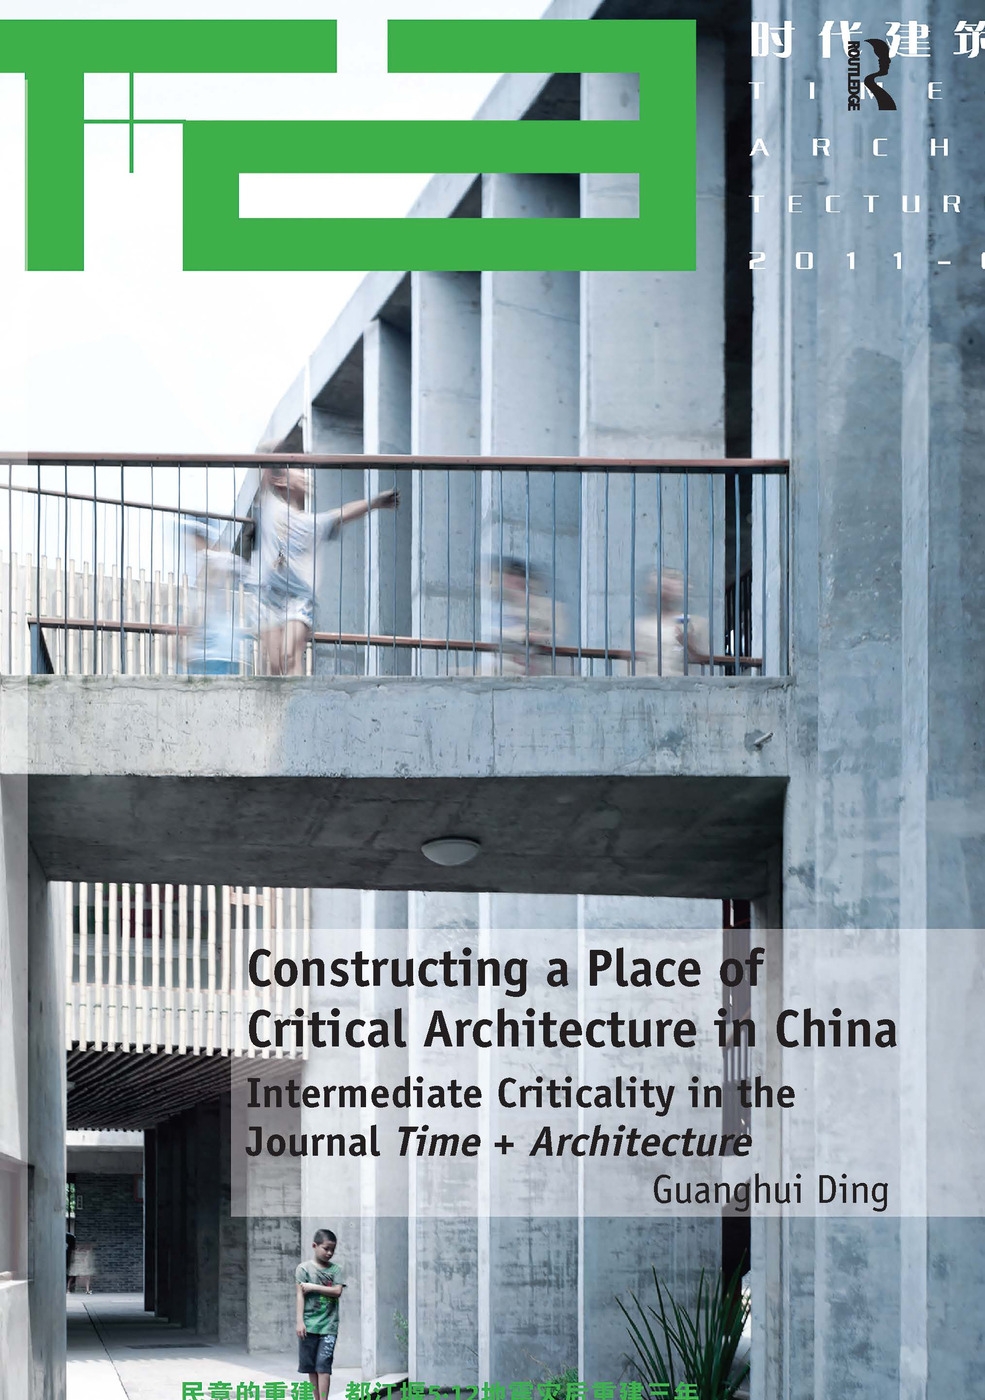 Constructing a Place of Critical Architecture in China: Intermediate Criticality in the Journal Time + Architecture